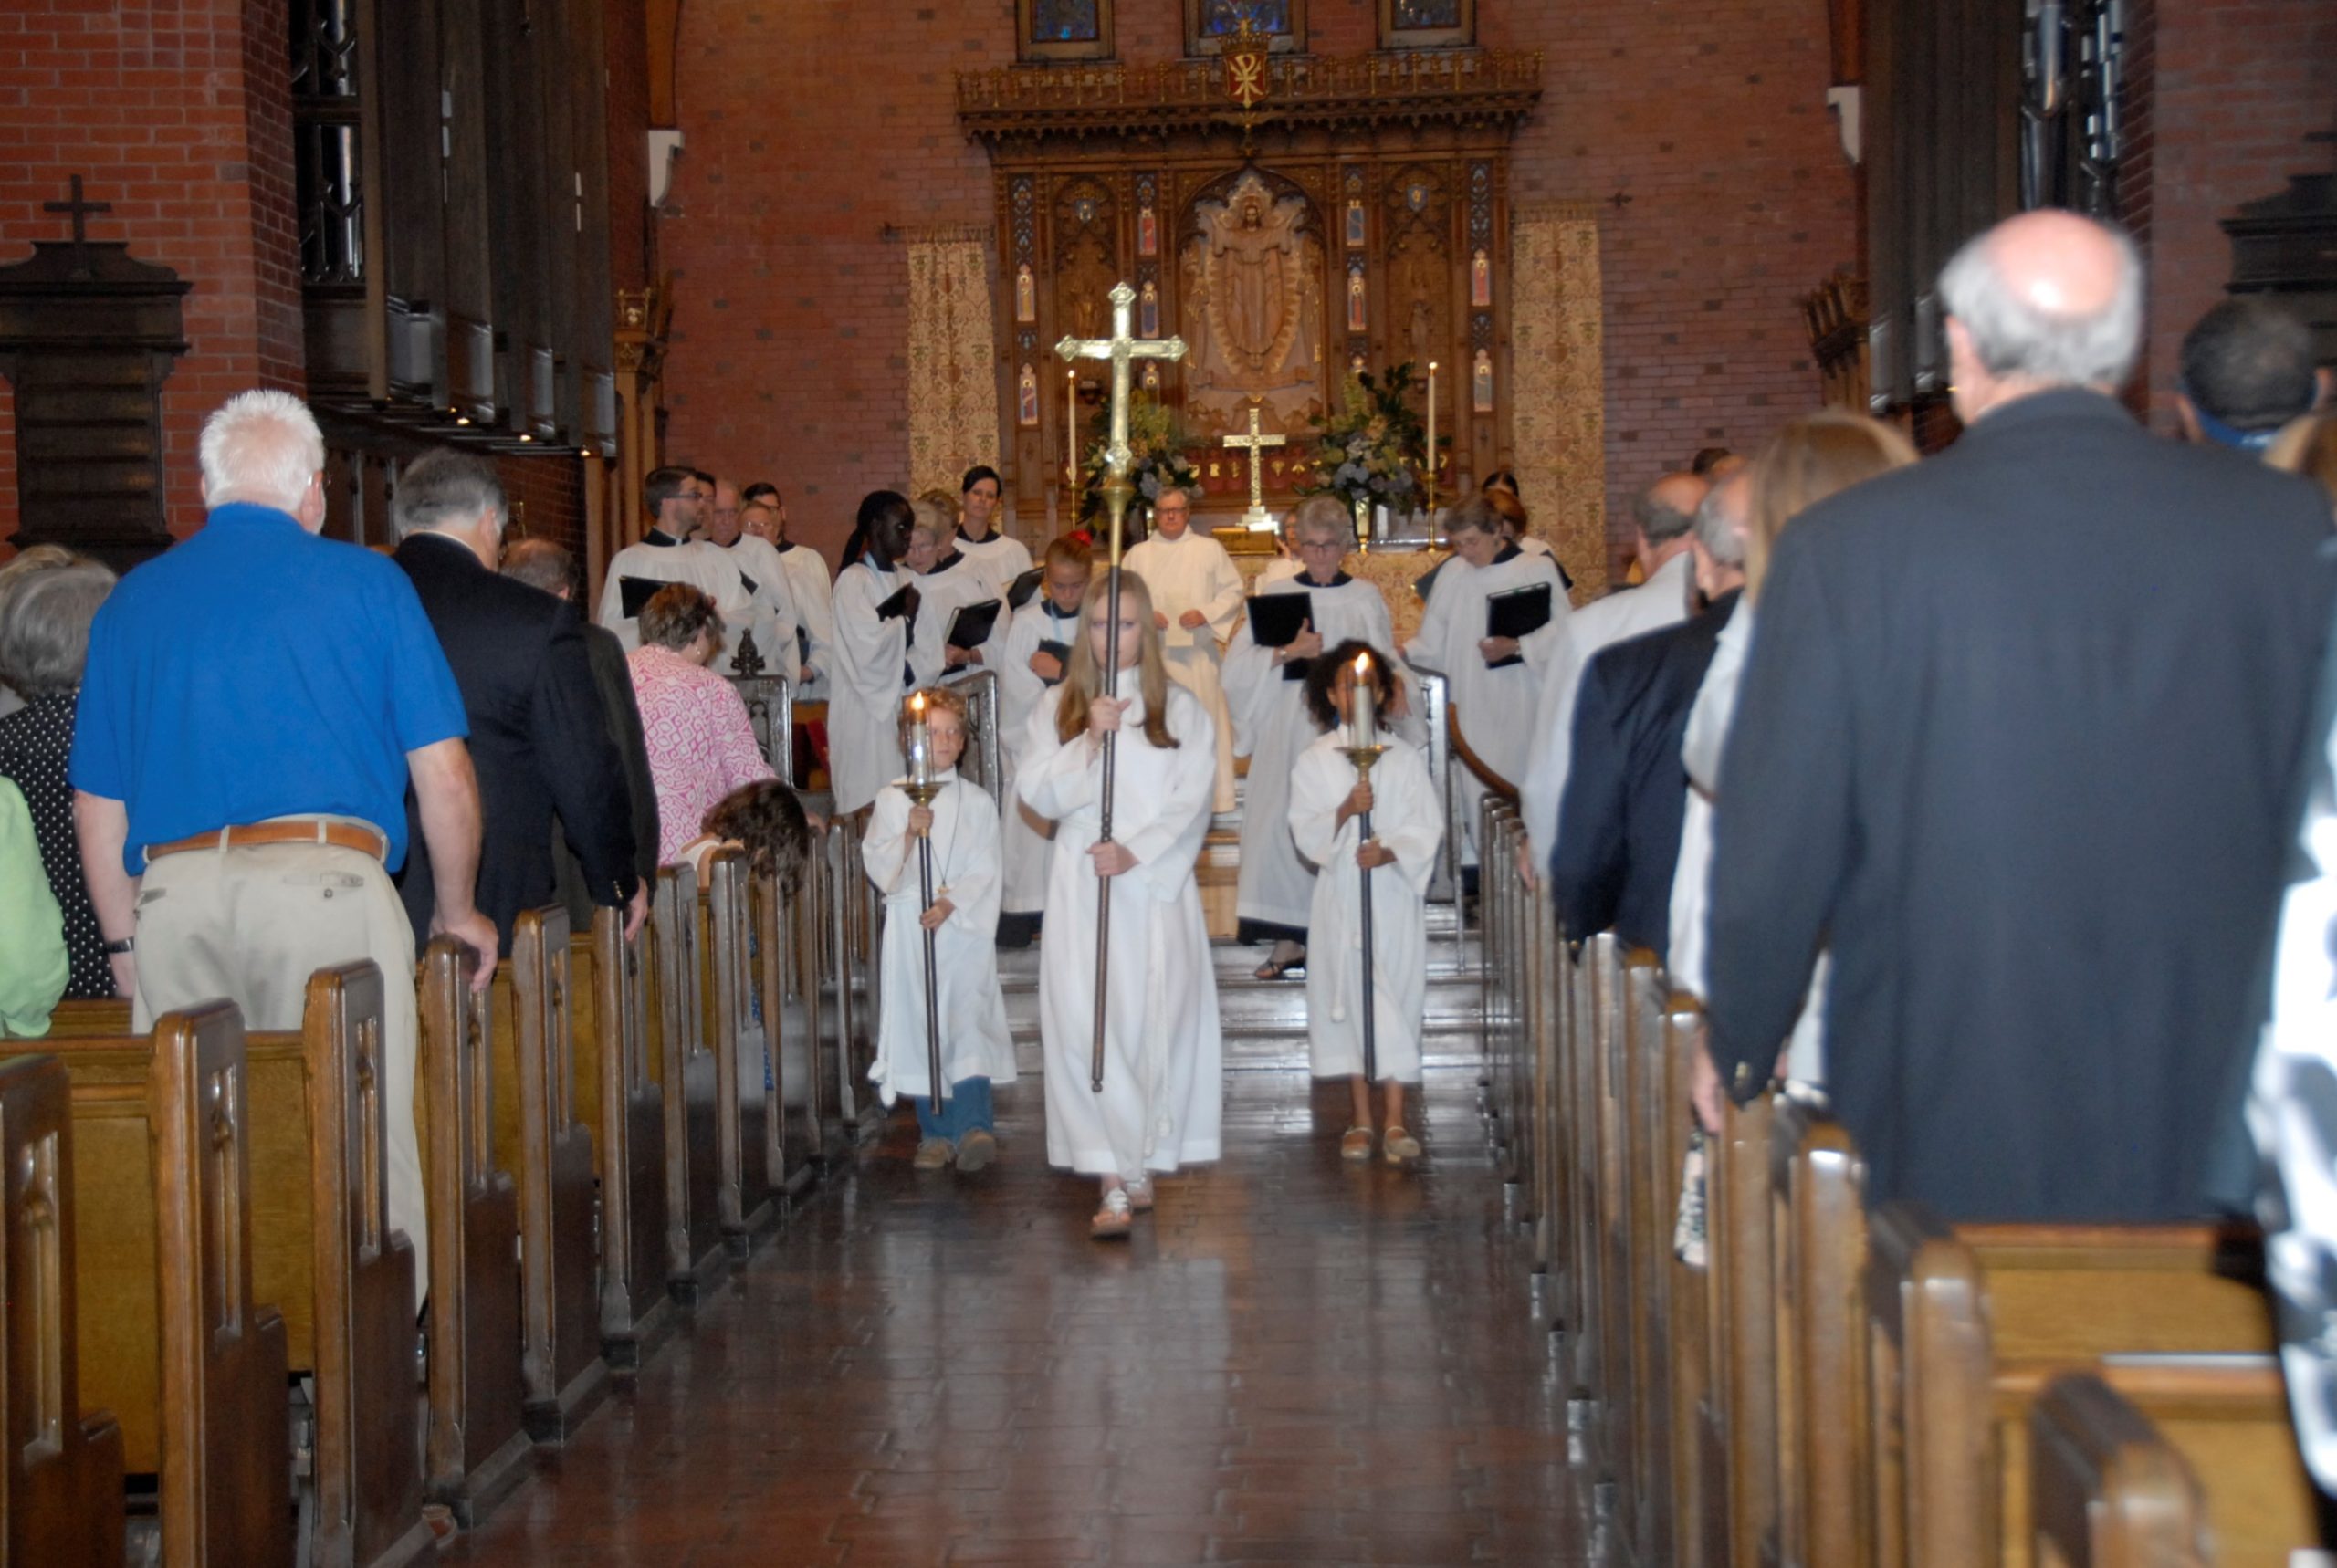 acolytes and crucifer lead procession out of church